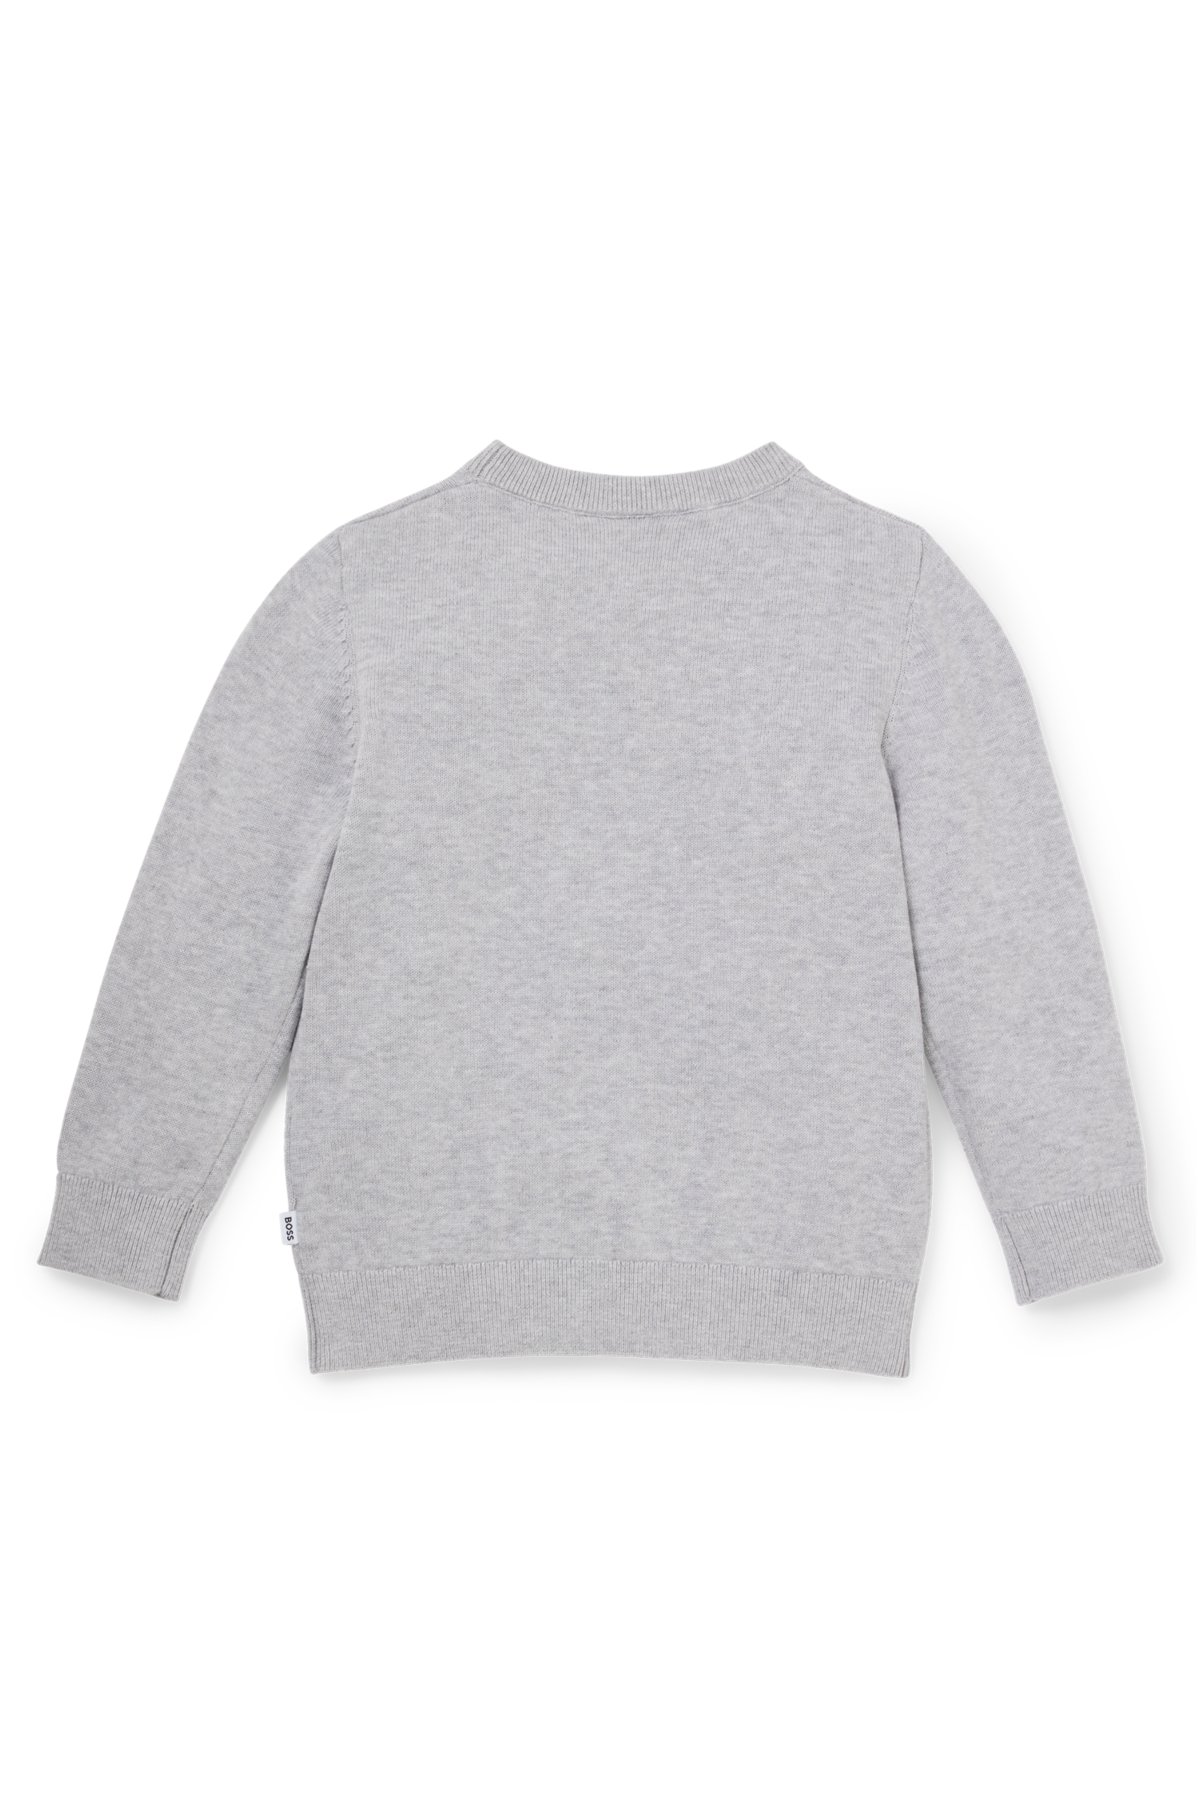 BOSS - Kids' sweater in combed cotton with embossed logo print